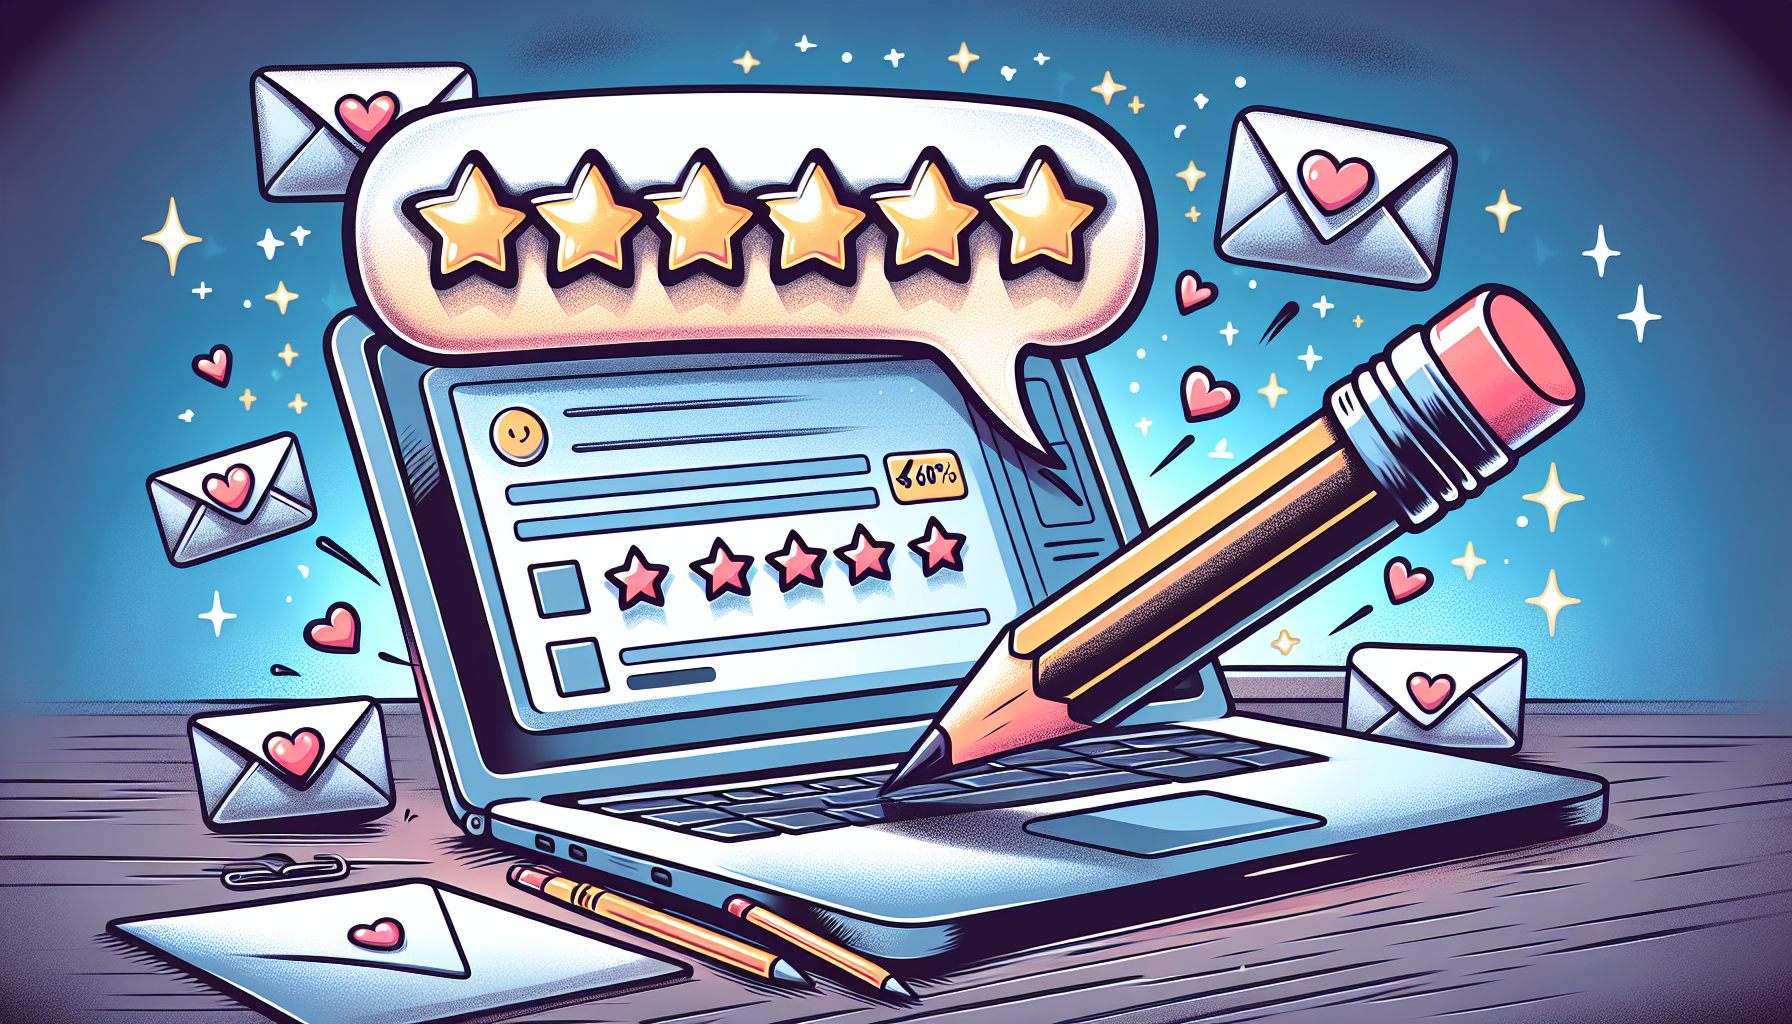 A cartoon illustration of a pencil writing a perfect review on a laptop screen, with a speech bubble filled with five shining stars right above it, surrounded by various email envelopes with hearts an